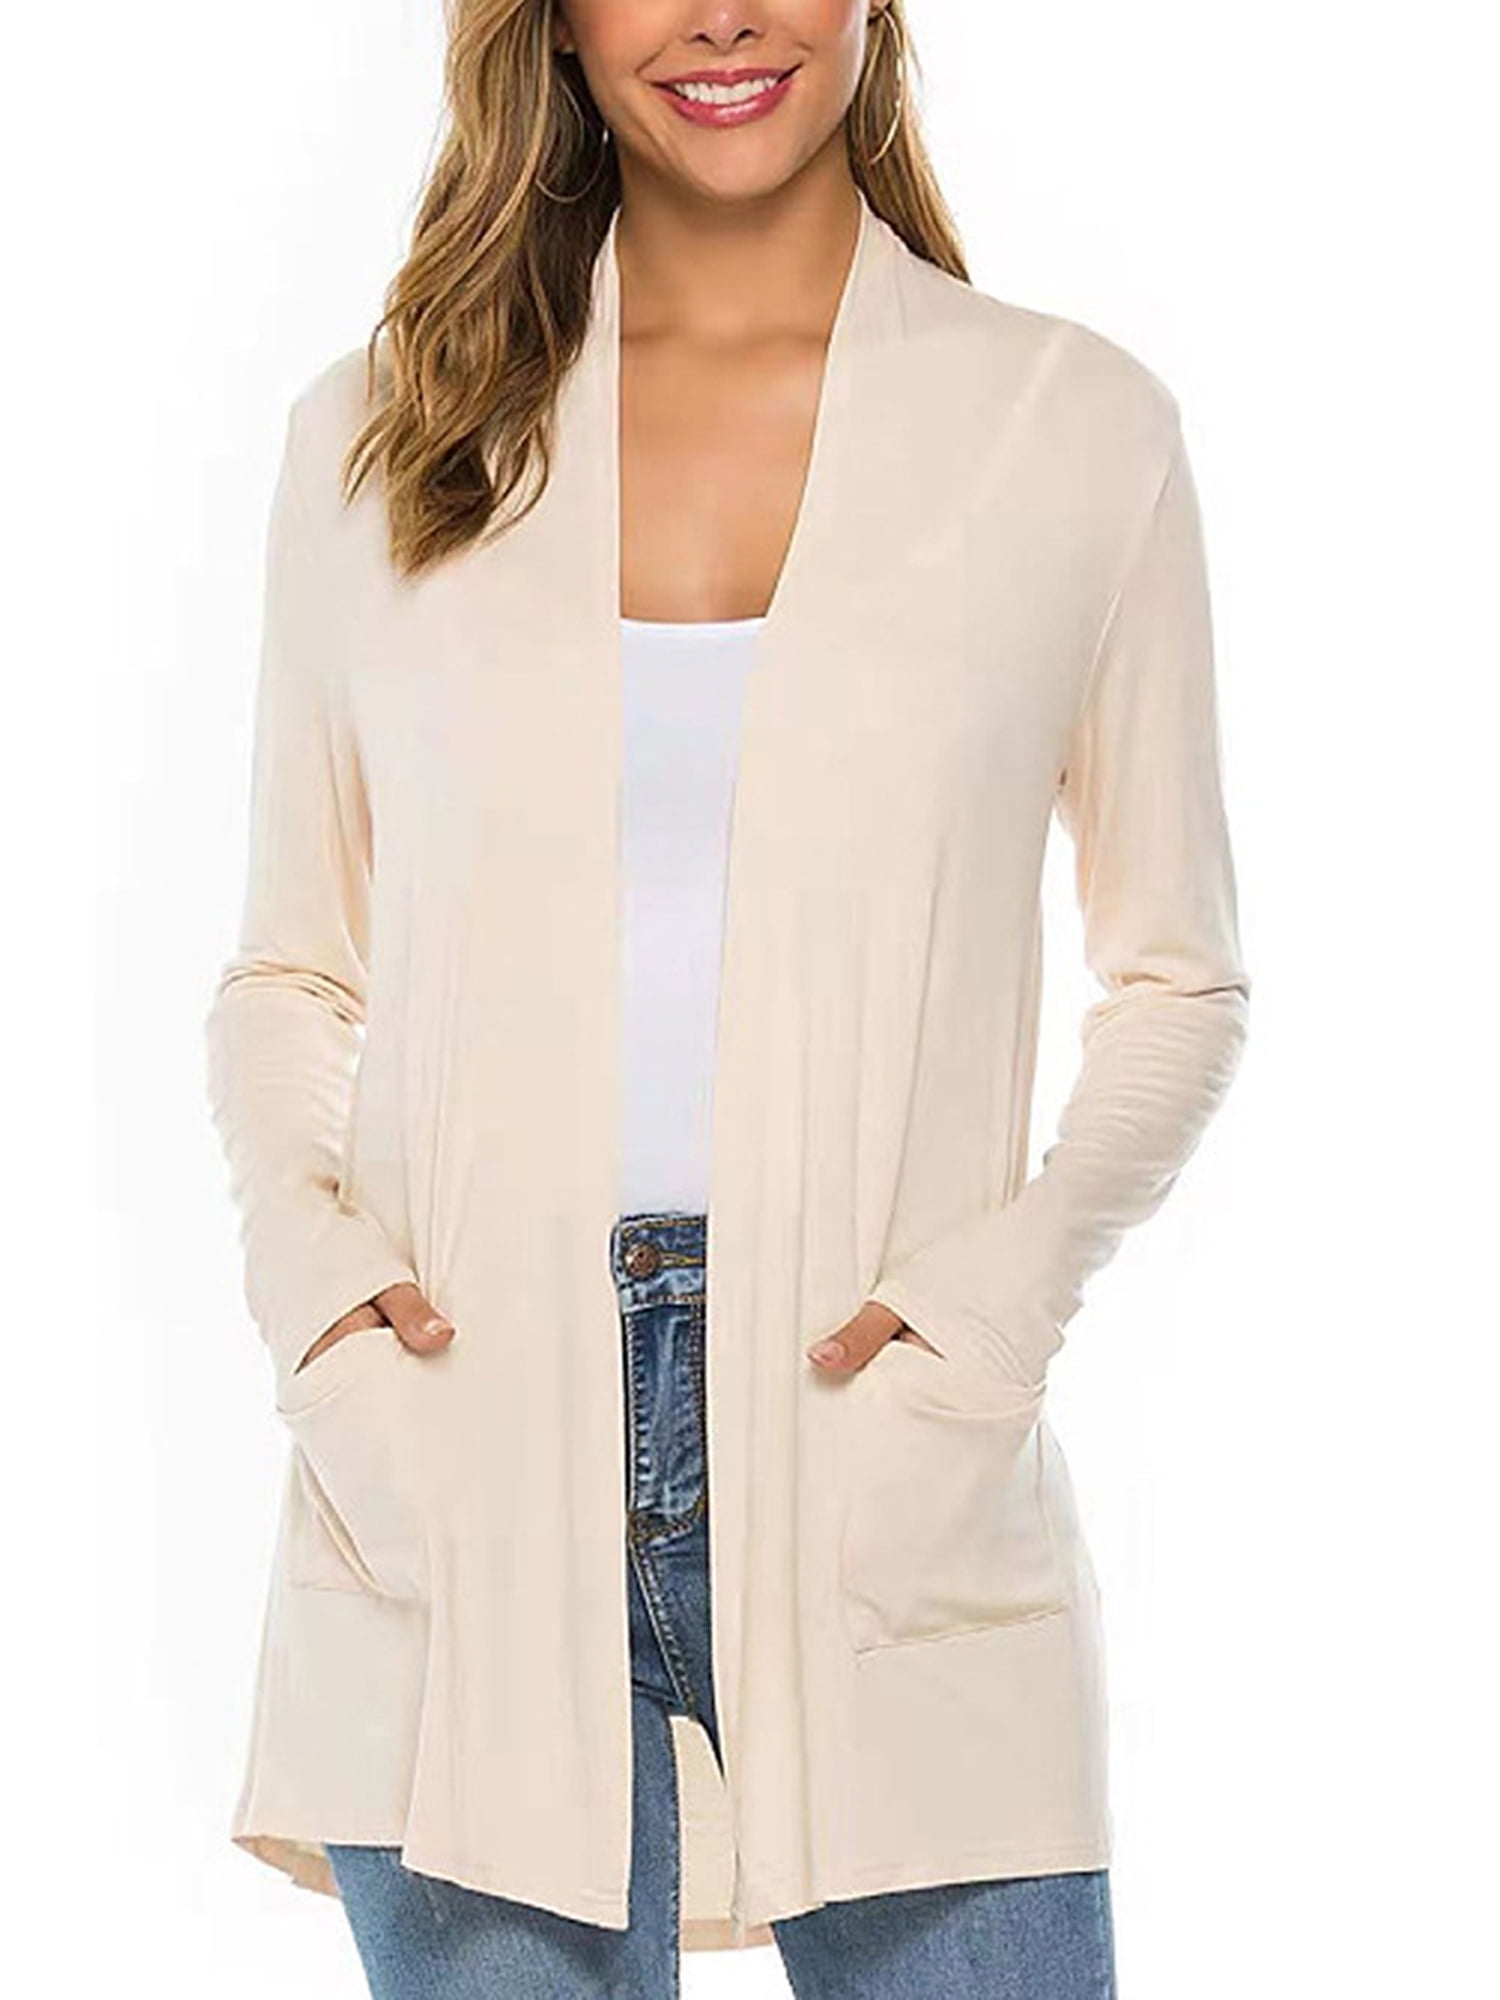 Women Casual Knit Cardigan Sweaters Long Sleeve Open Front Tops with  Pockets - Walmart.com